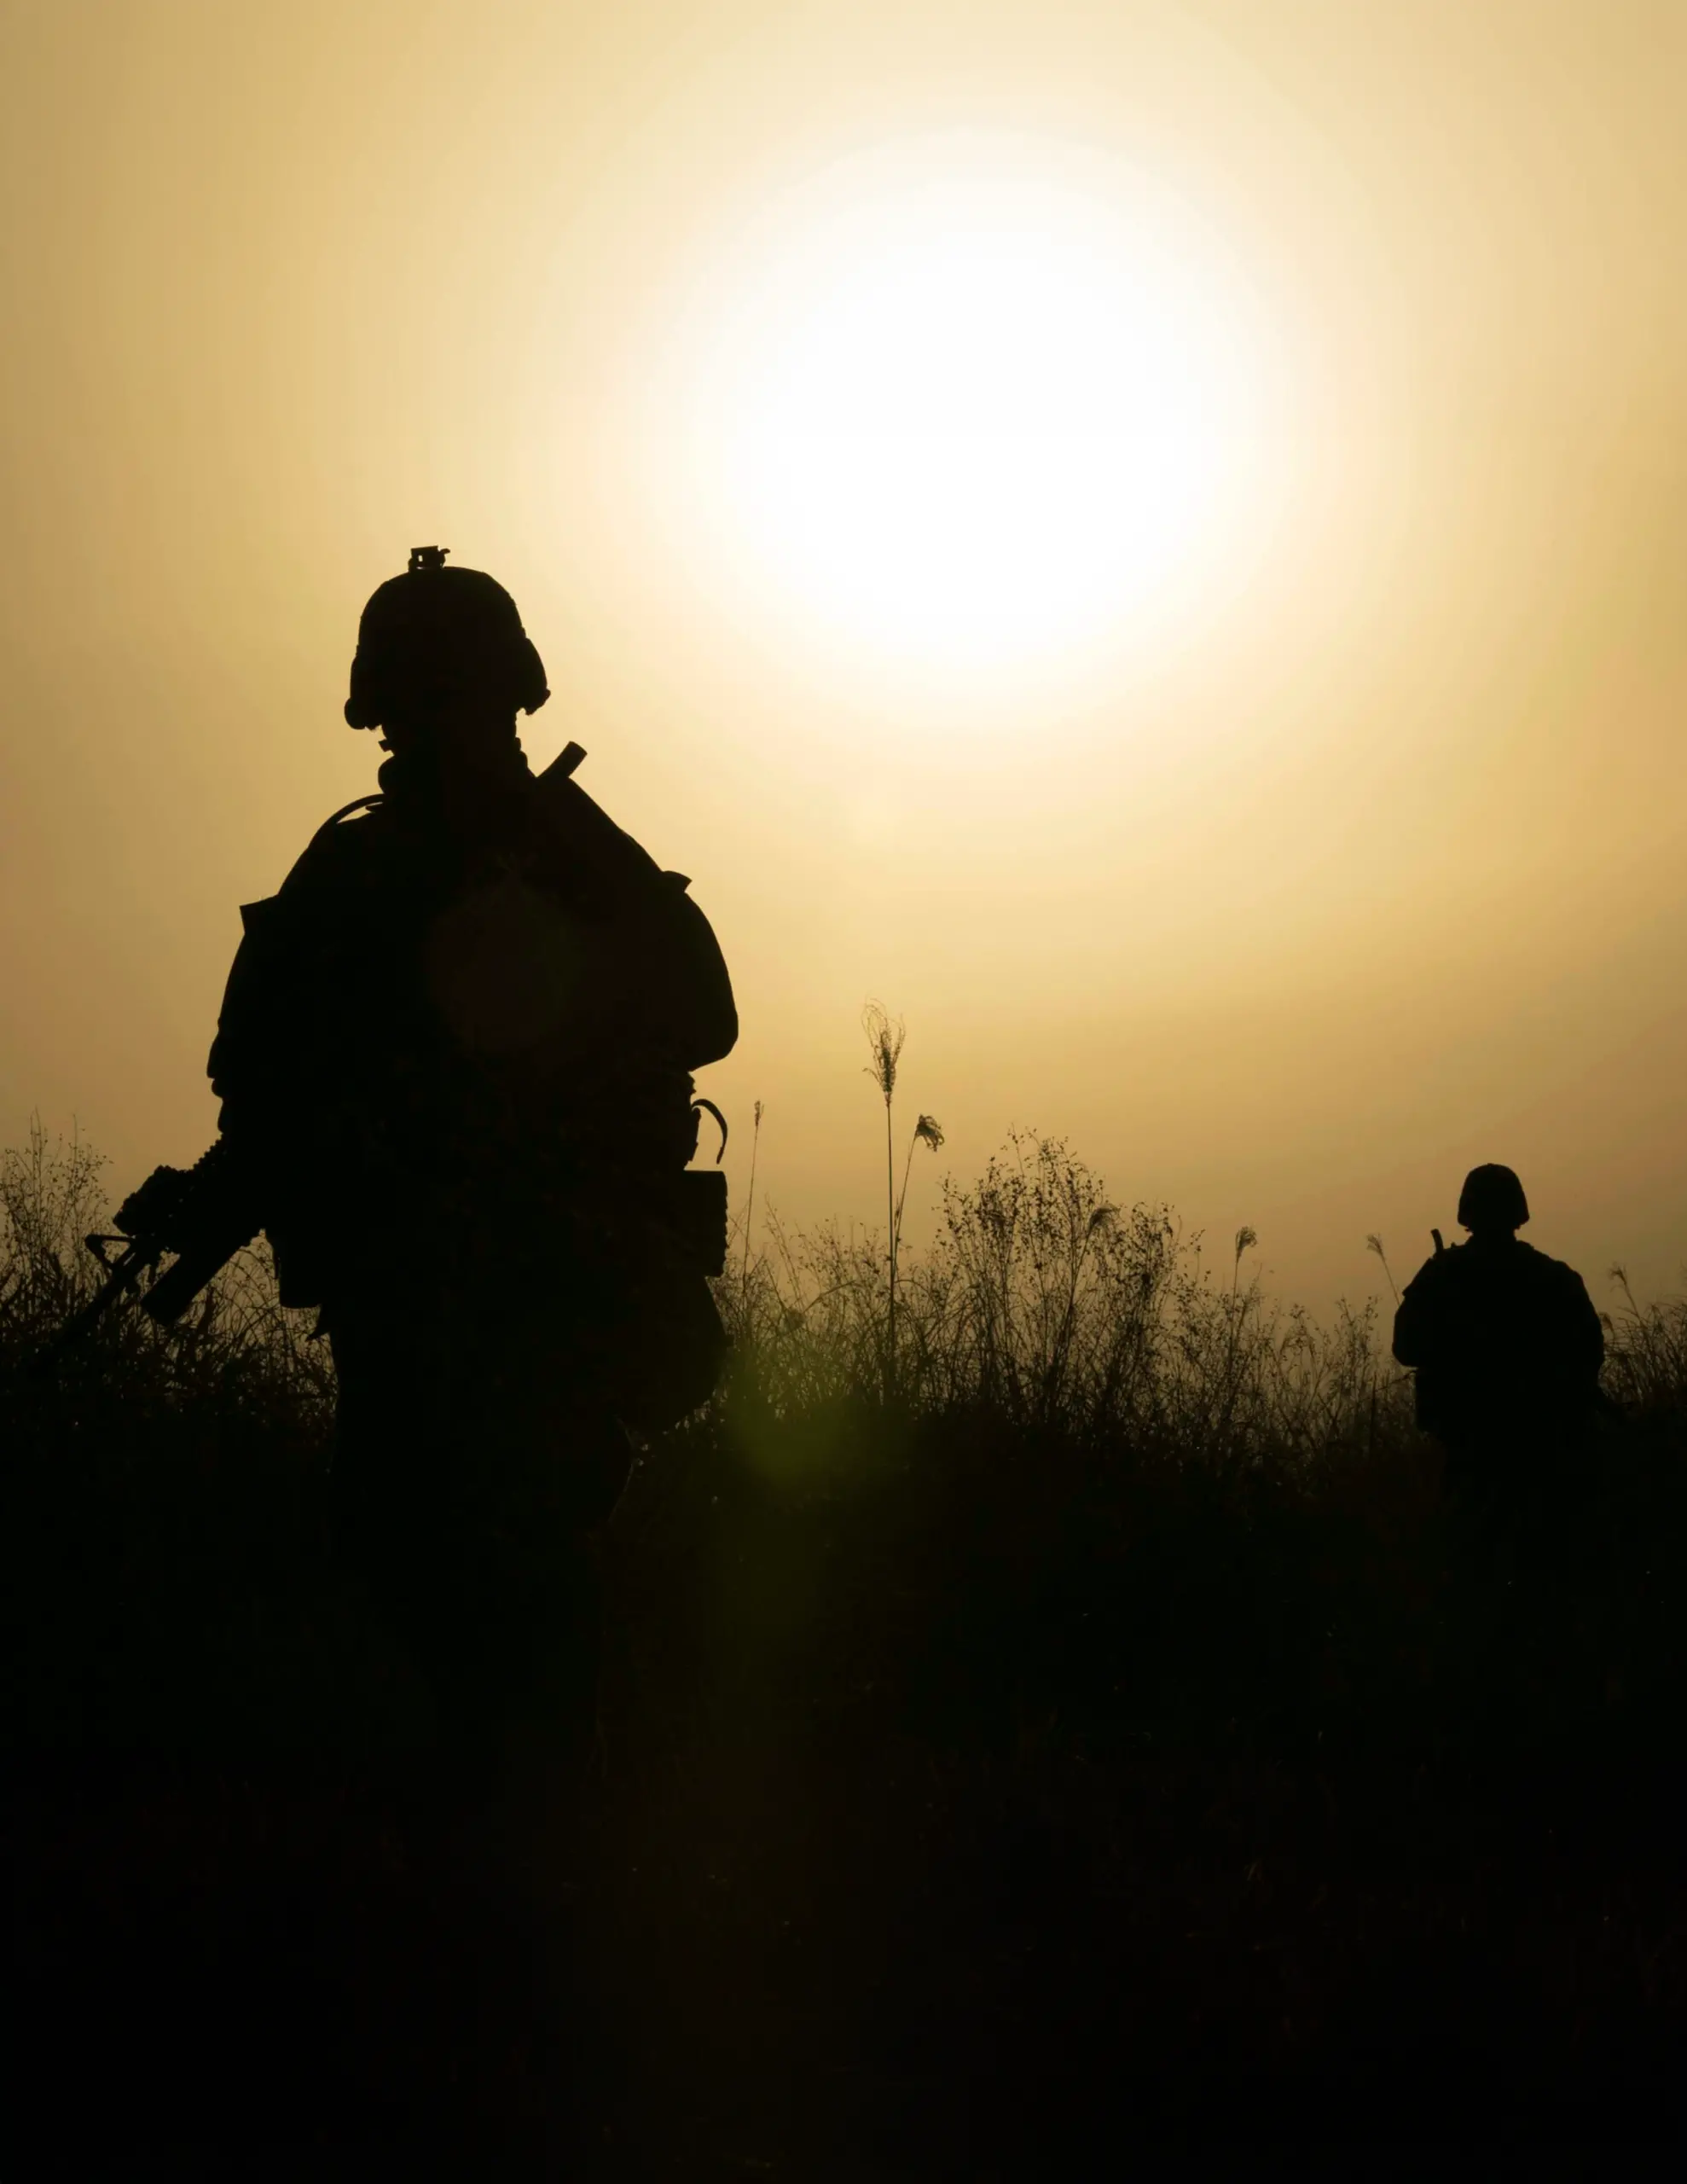 Image of a silhouette of two soldiers with the sun setting.